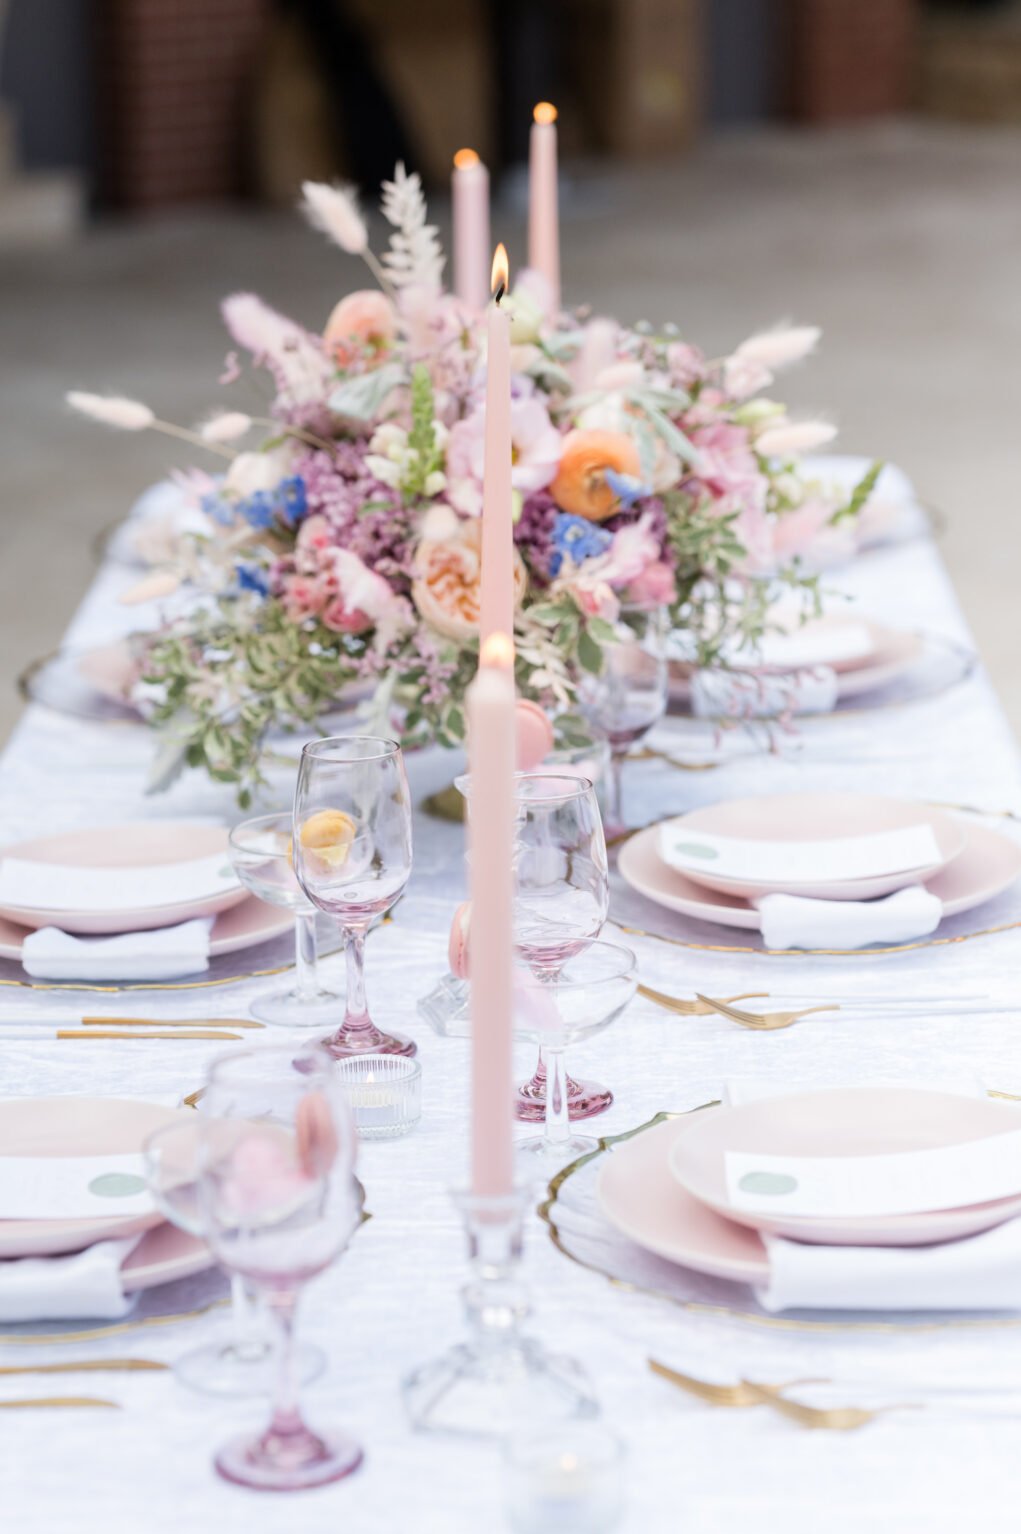 Whimsical Purple, Orange and Pink Roses, Blue Stock Flowers, and Greenery Wedding Reception Centerpiece Ideas | Tampa Bay Florist Save The Date Florida | Planner MDP Events | Photographer Amanda Zabrocki Photography